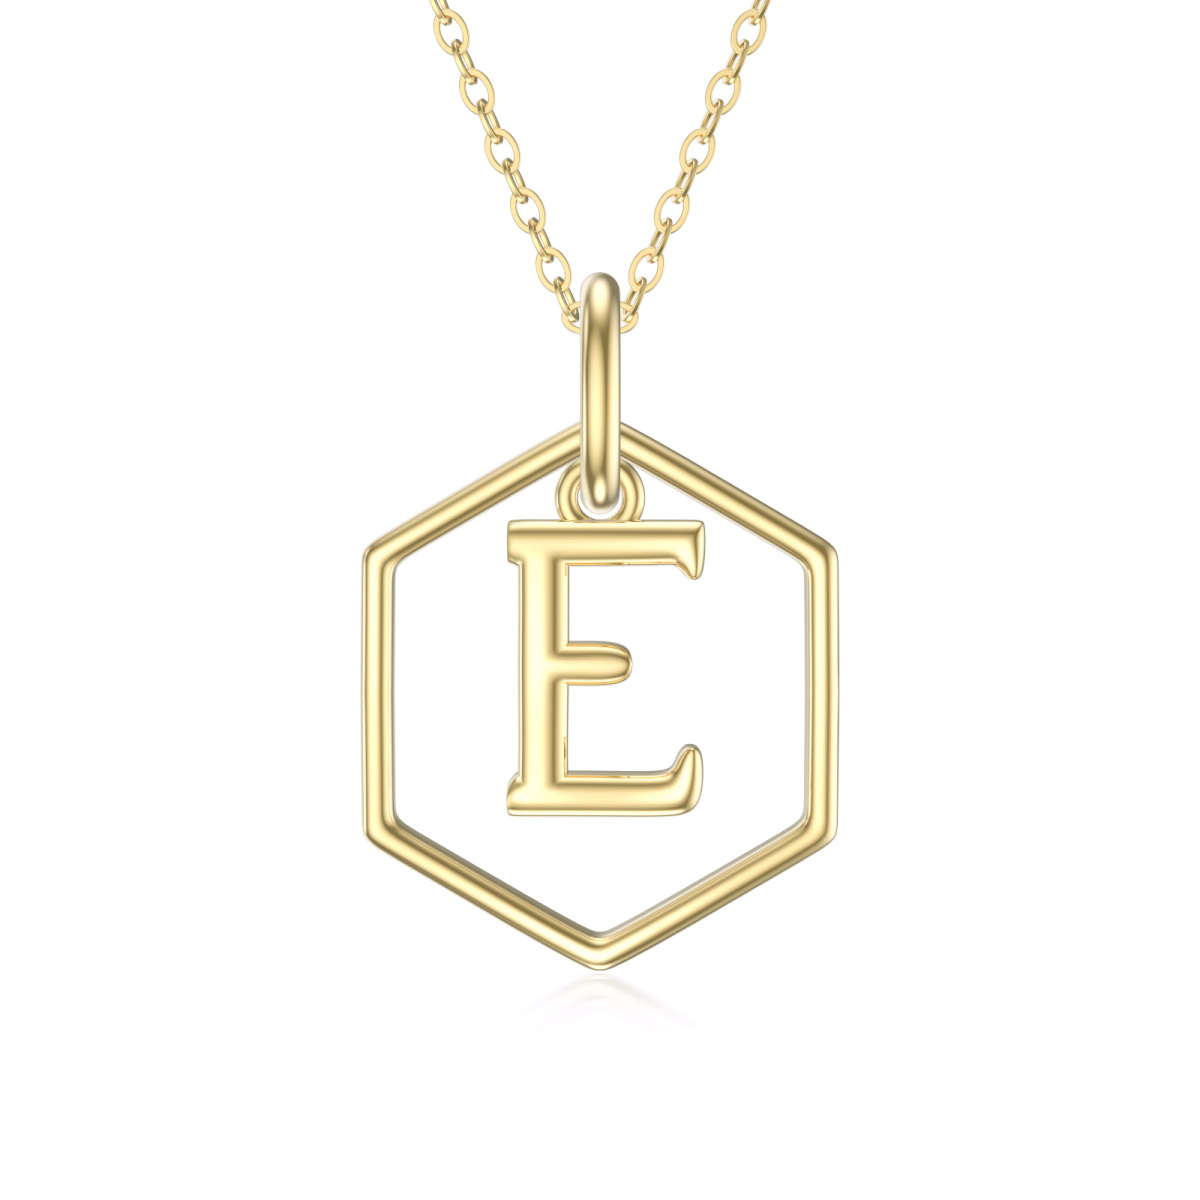 9K Gold Round Pendant Necklace with Initial Letter E-1